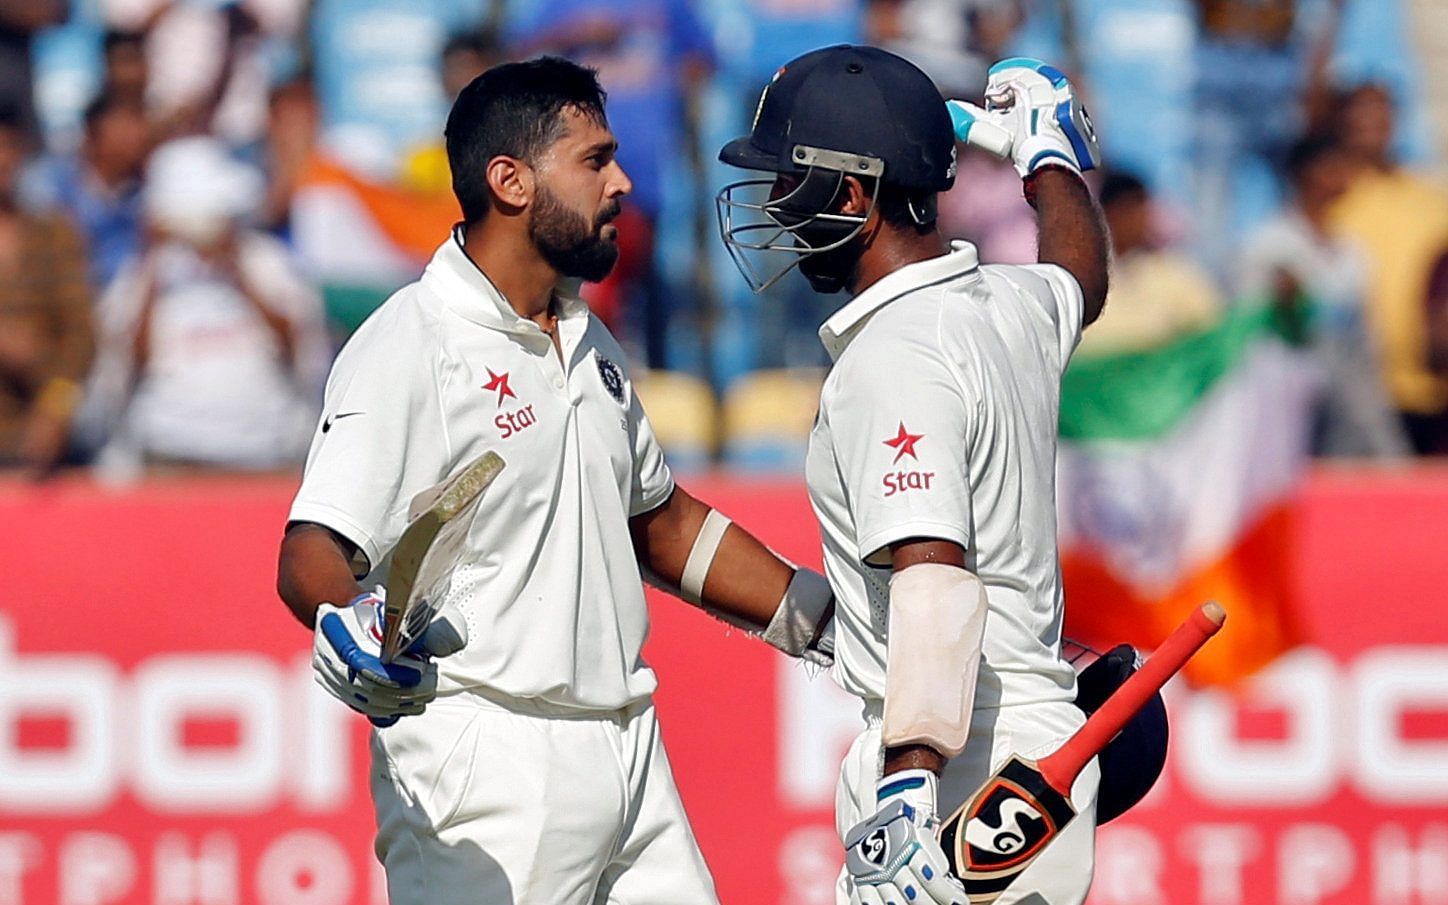 Vijay and Pujara have been two of India